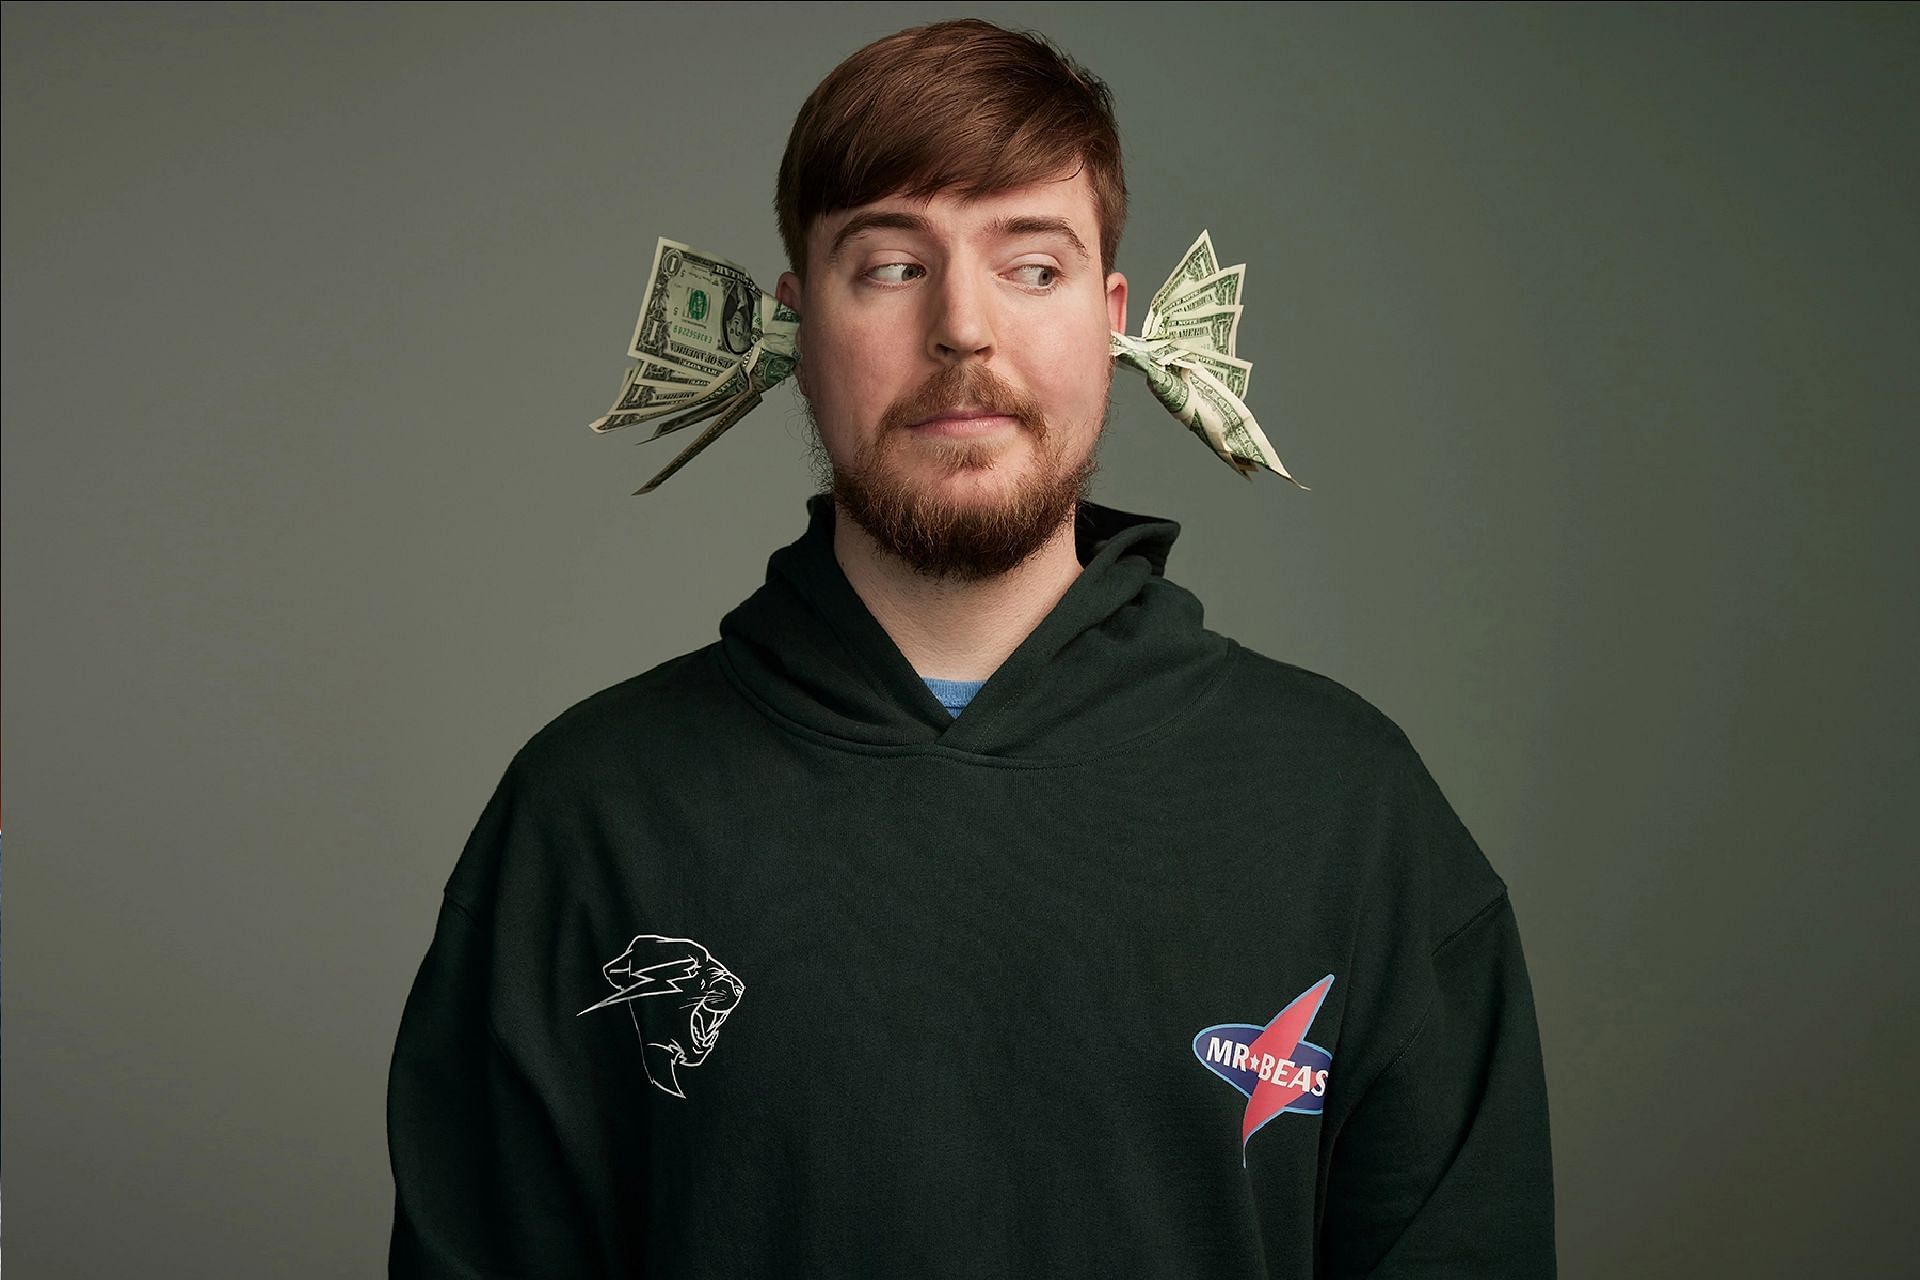 Fortnite and MrBeast will give away $1 million in a pop-up game challenge